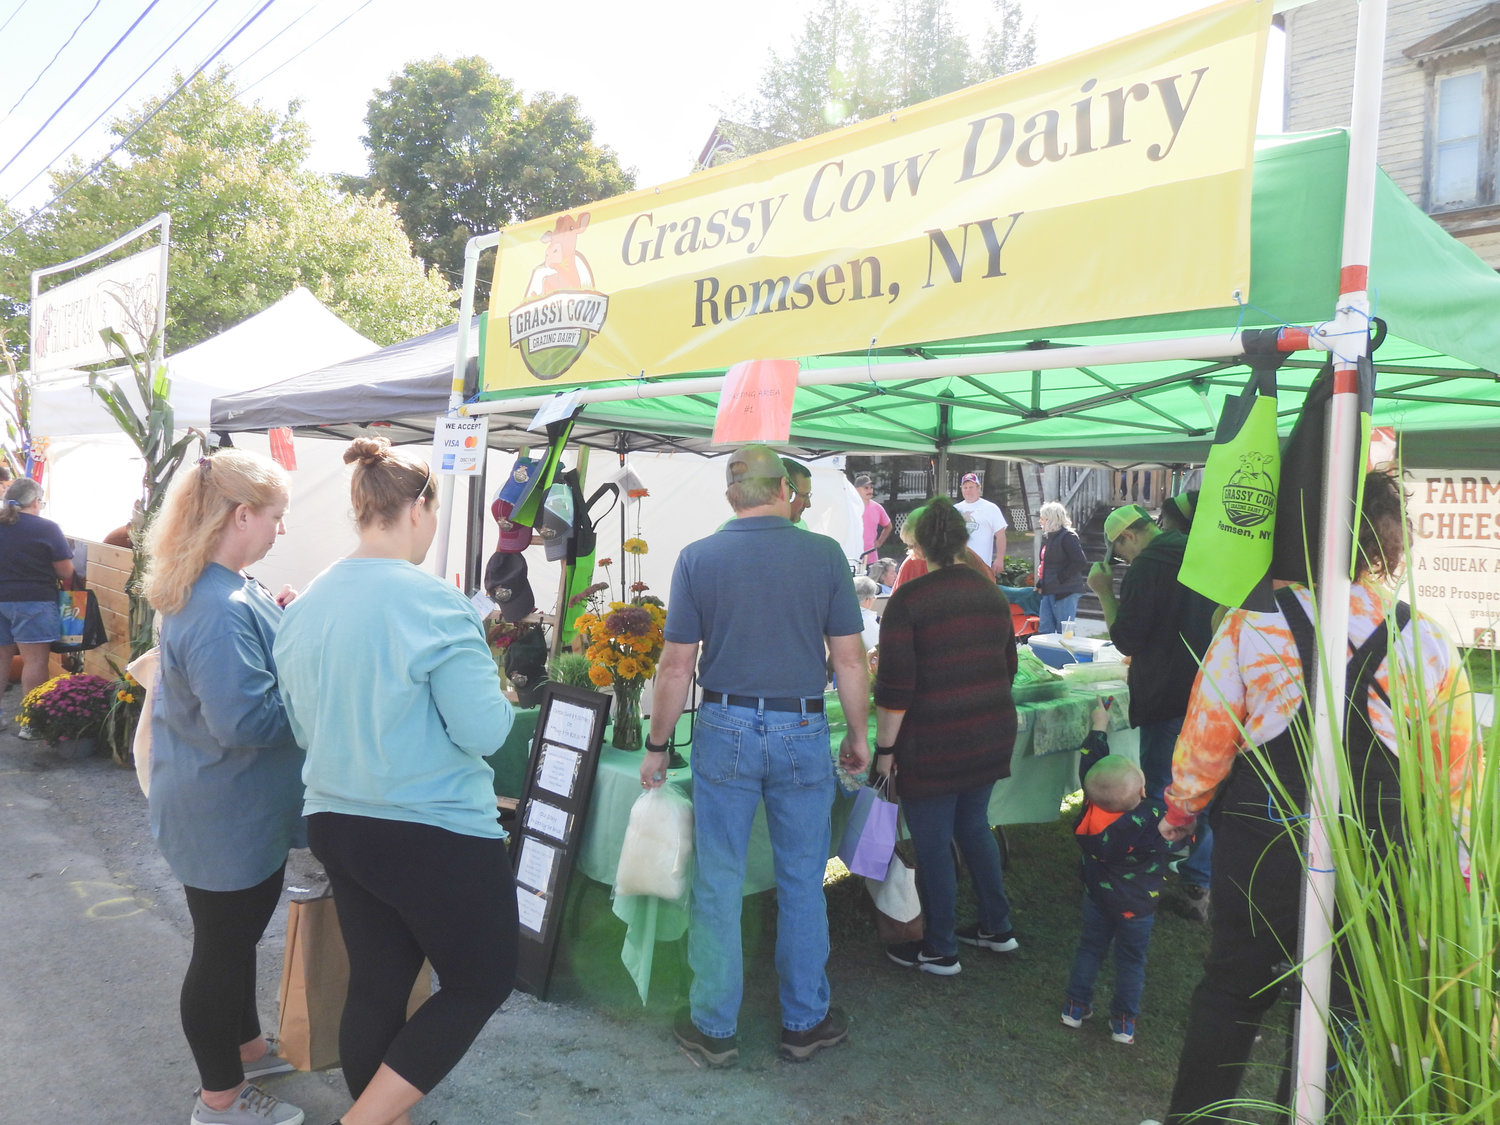 The Remsen Barn Festival of the Arts saw Main Street packed with people looking to sample good foods and take home unique arts and crafts on Saturday, Sept. 24 in the town of Remsen.